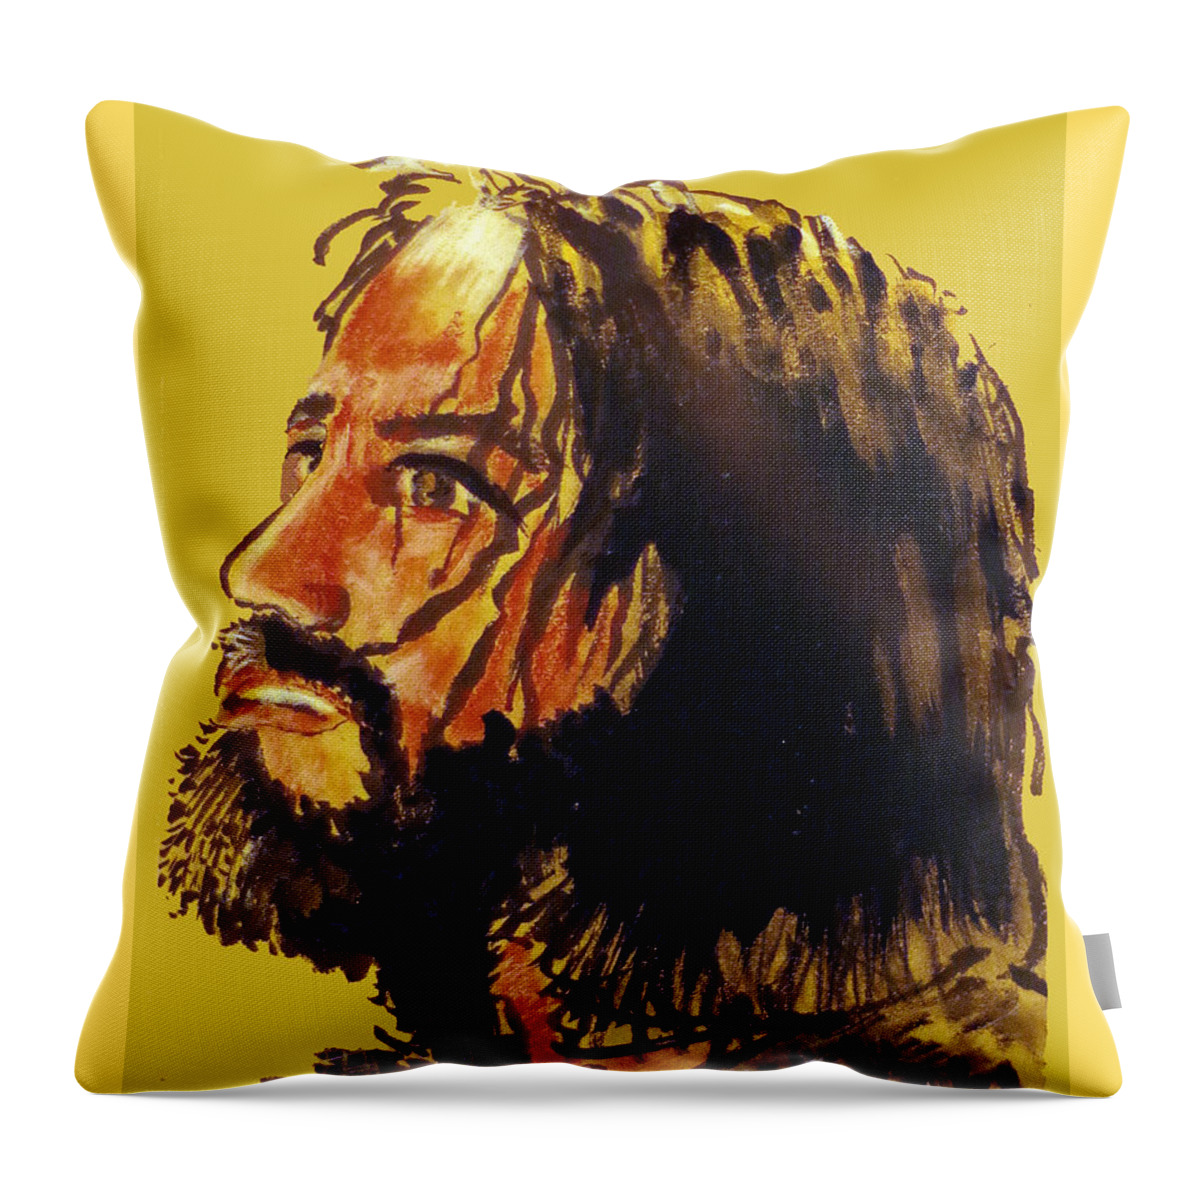 Man Of Sorrows Throw Pillow featuring the painting Man of Sorrows by Seth Weaver